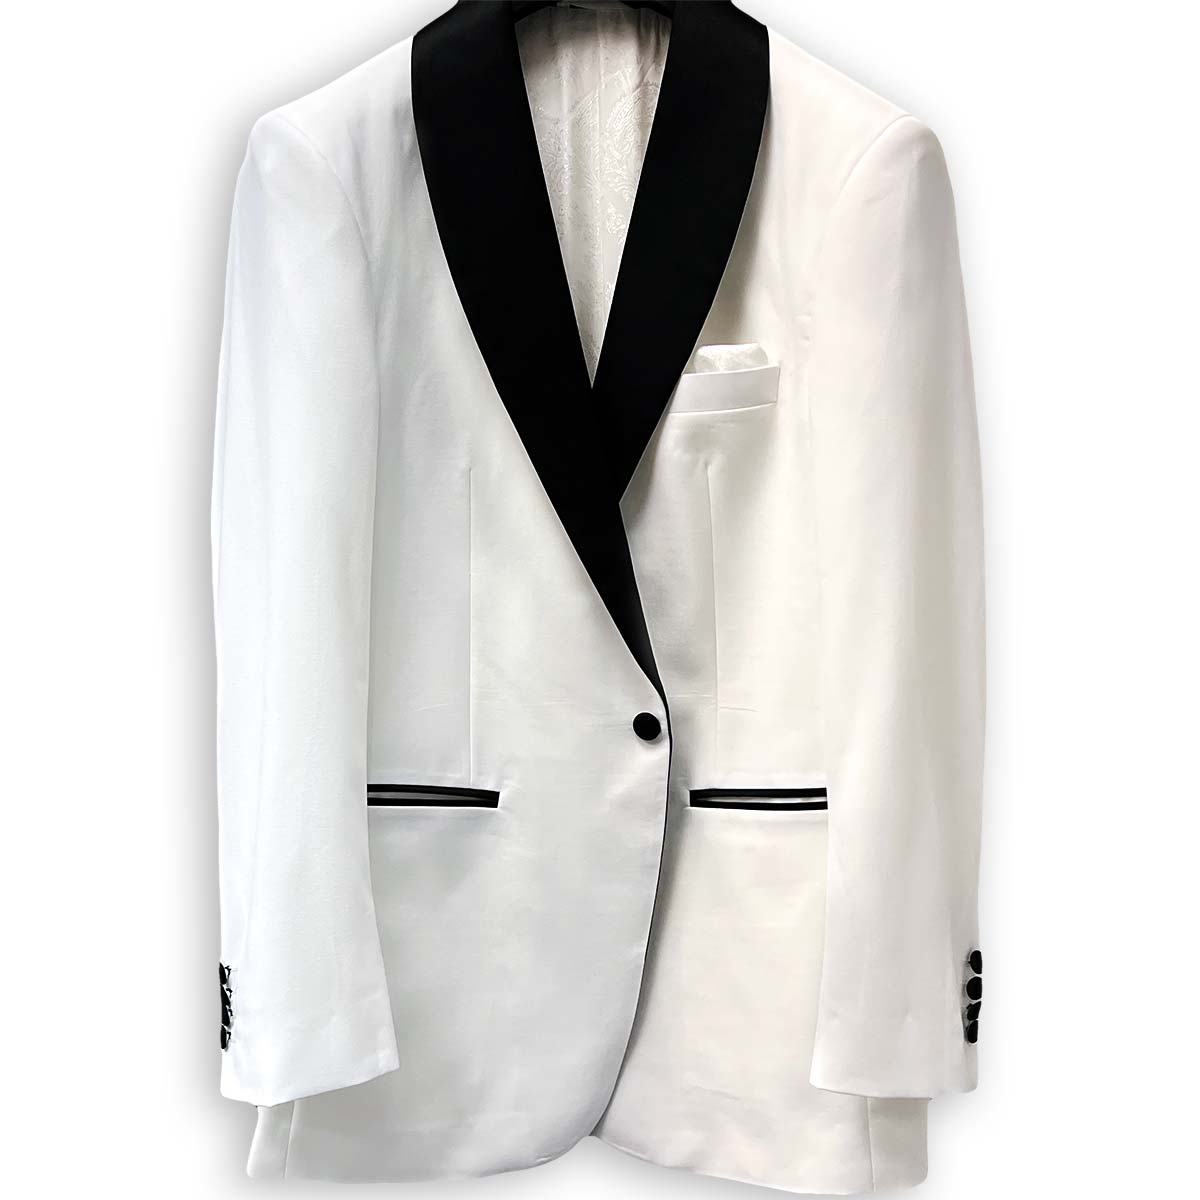 Westwood Hart tuxedo tailored in 100% Australian Merino wool with black grosgrain trimming, ideal for formal occasions.